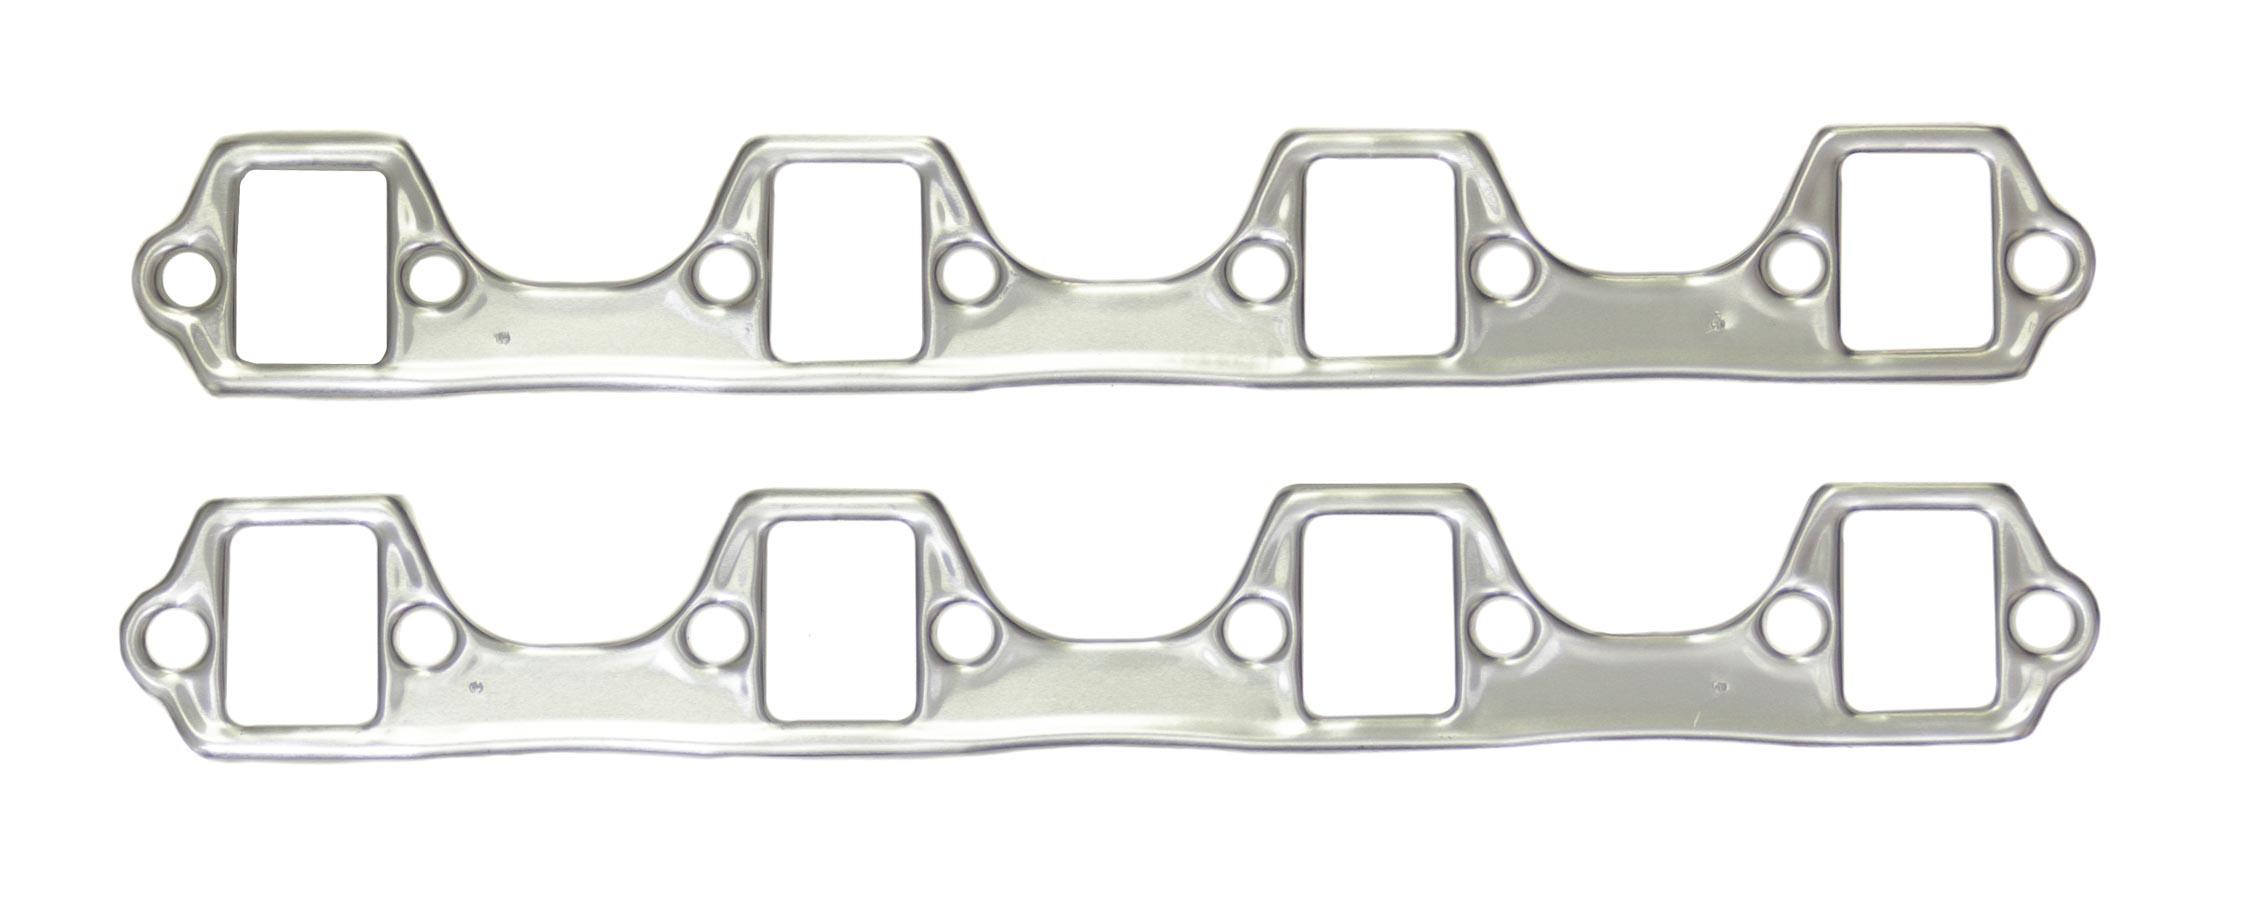 For Honda Civic 73-18 Percy's High Performance Seal-4-Good Exhaust Header Gasket